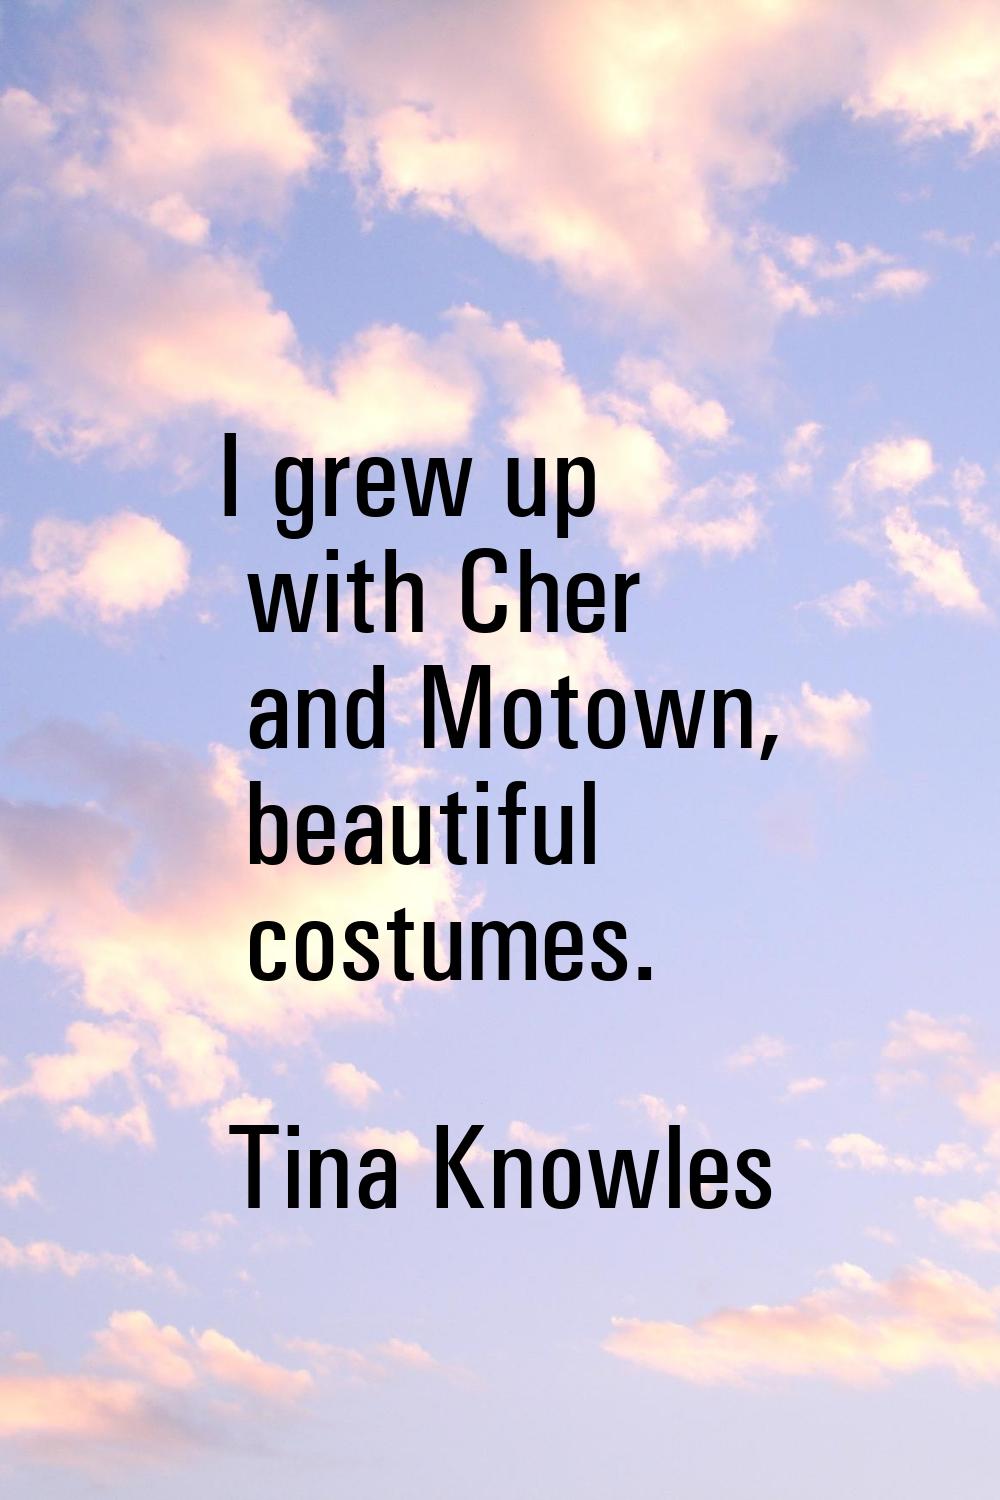 I grew up with Cher and Motown, beautiful costumes.